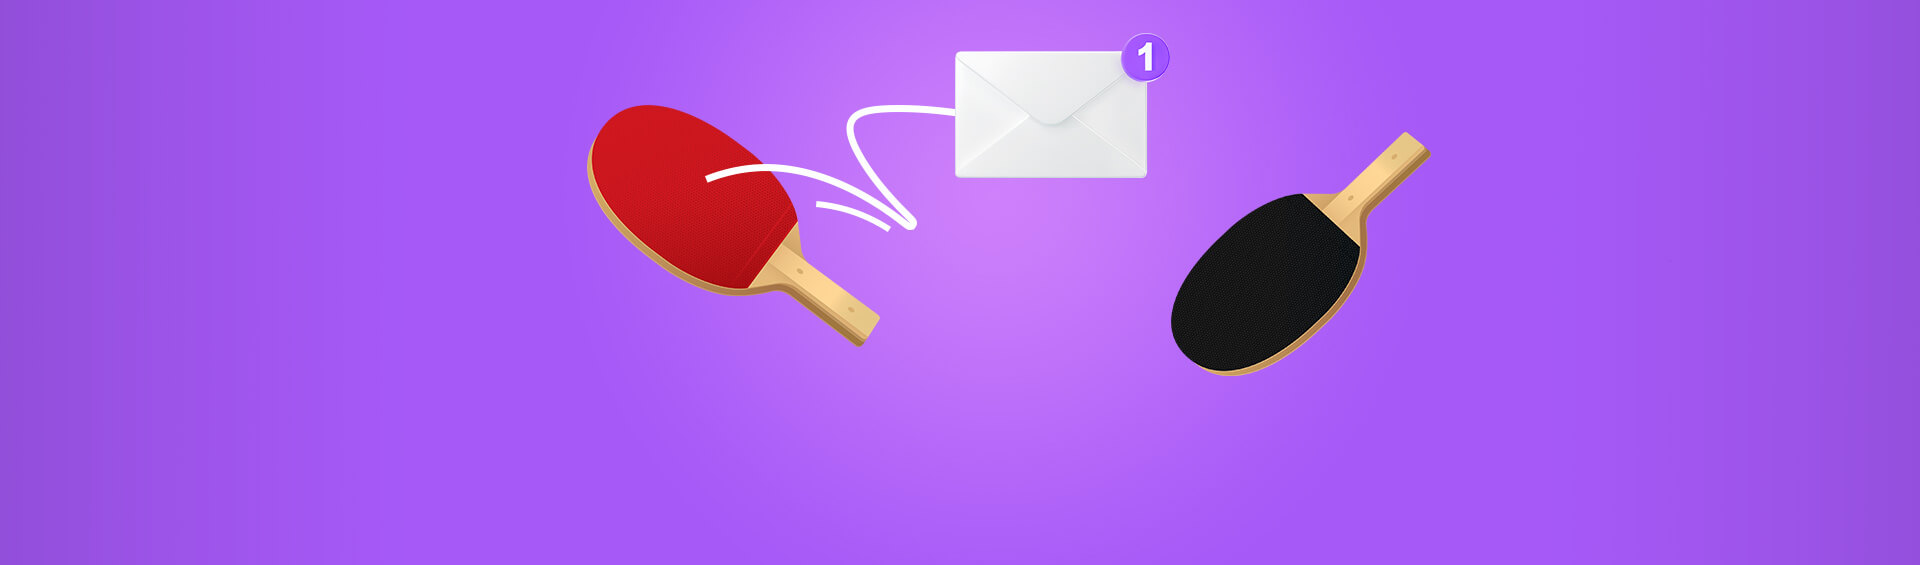 Email Bounce and Its Prevention: Tips on Reducing Email Bounce Rate